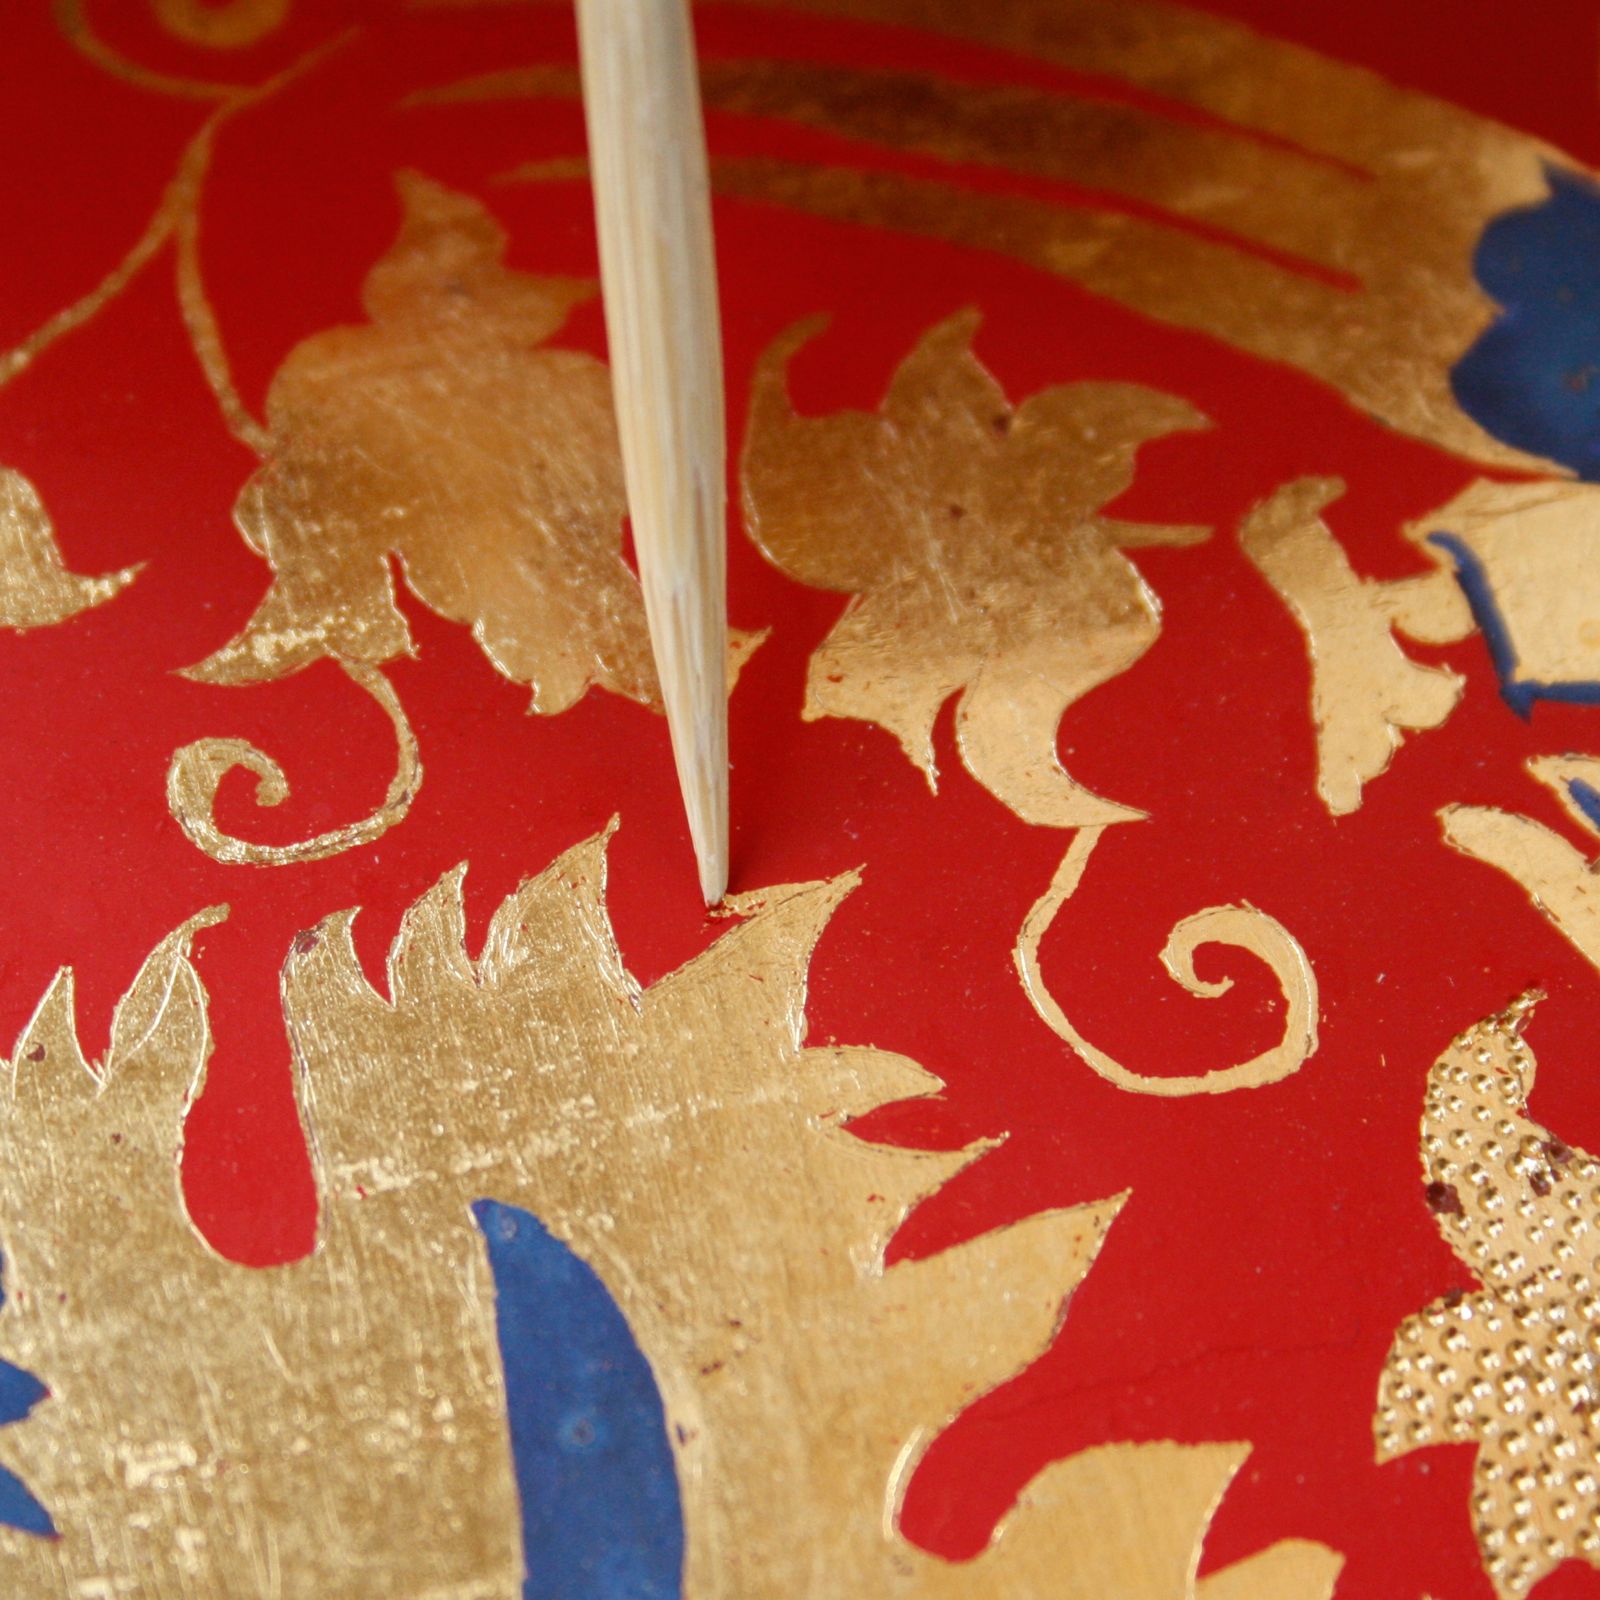 The patterns are made using sgraffito. Red paint is scraped away using a bamboo stick, revealing the gold underneath